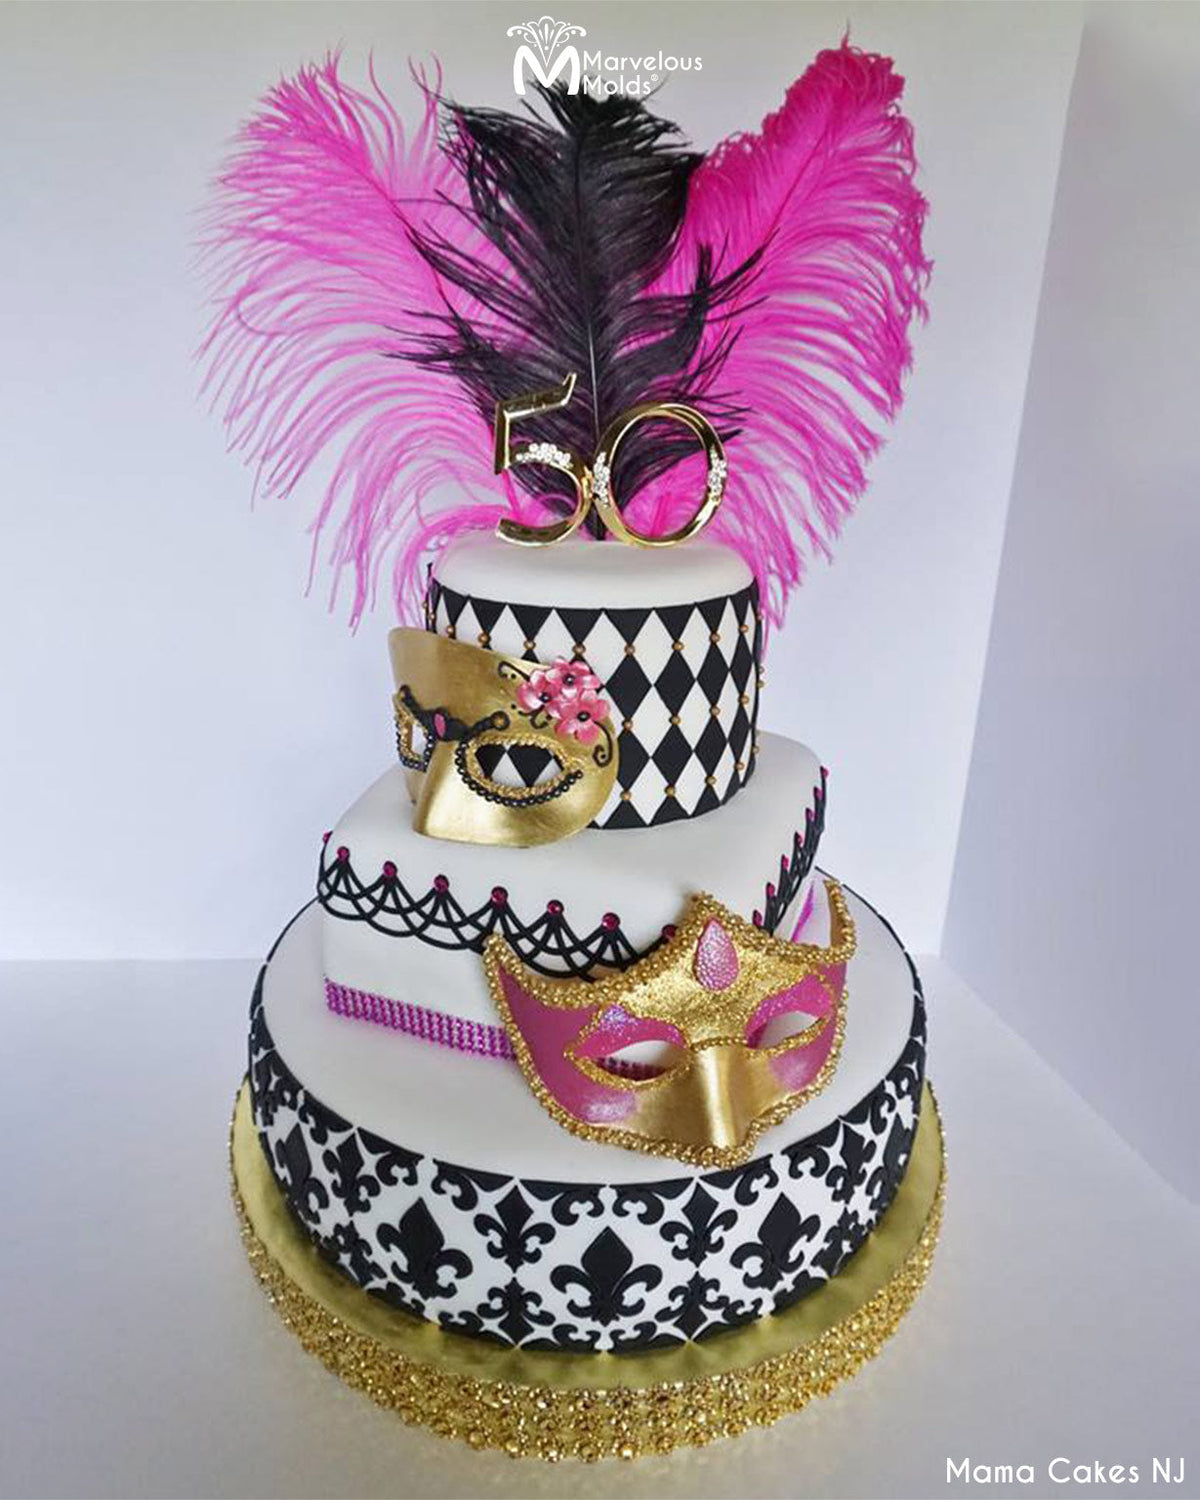 Masquerade Masks Mardi Gras Themed Birthday Cake Decorated Using the Marvelous Molds Overlapping Drop String Silicone Onlay